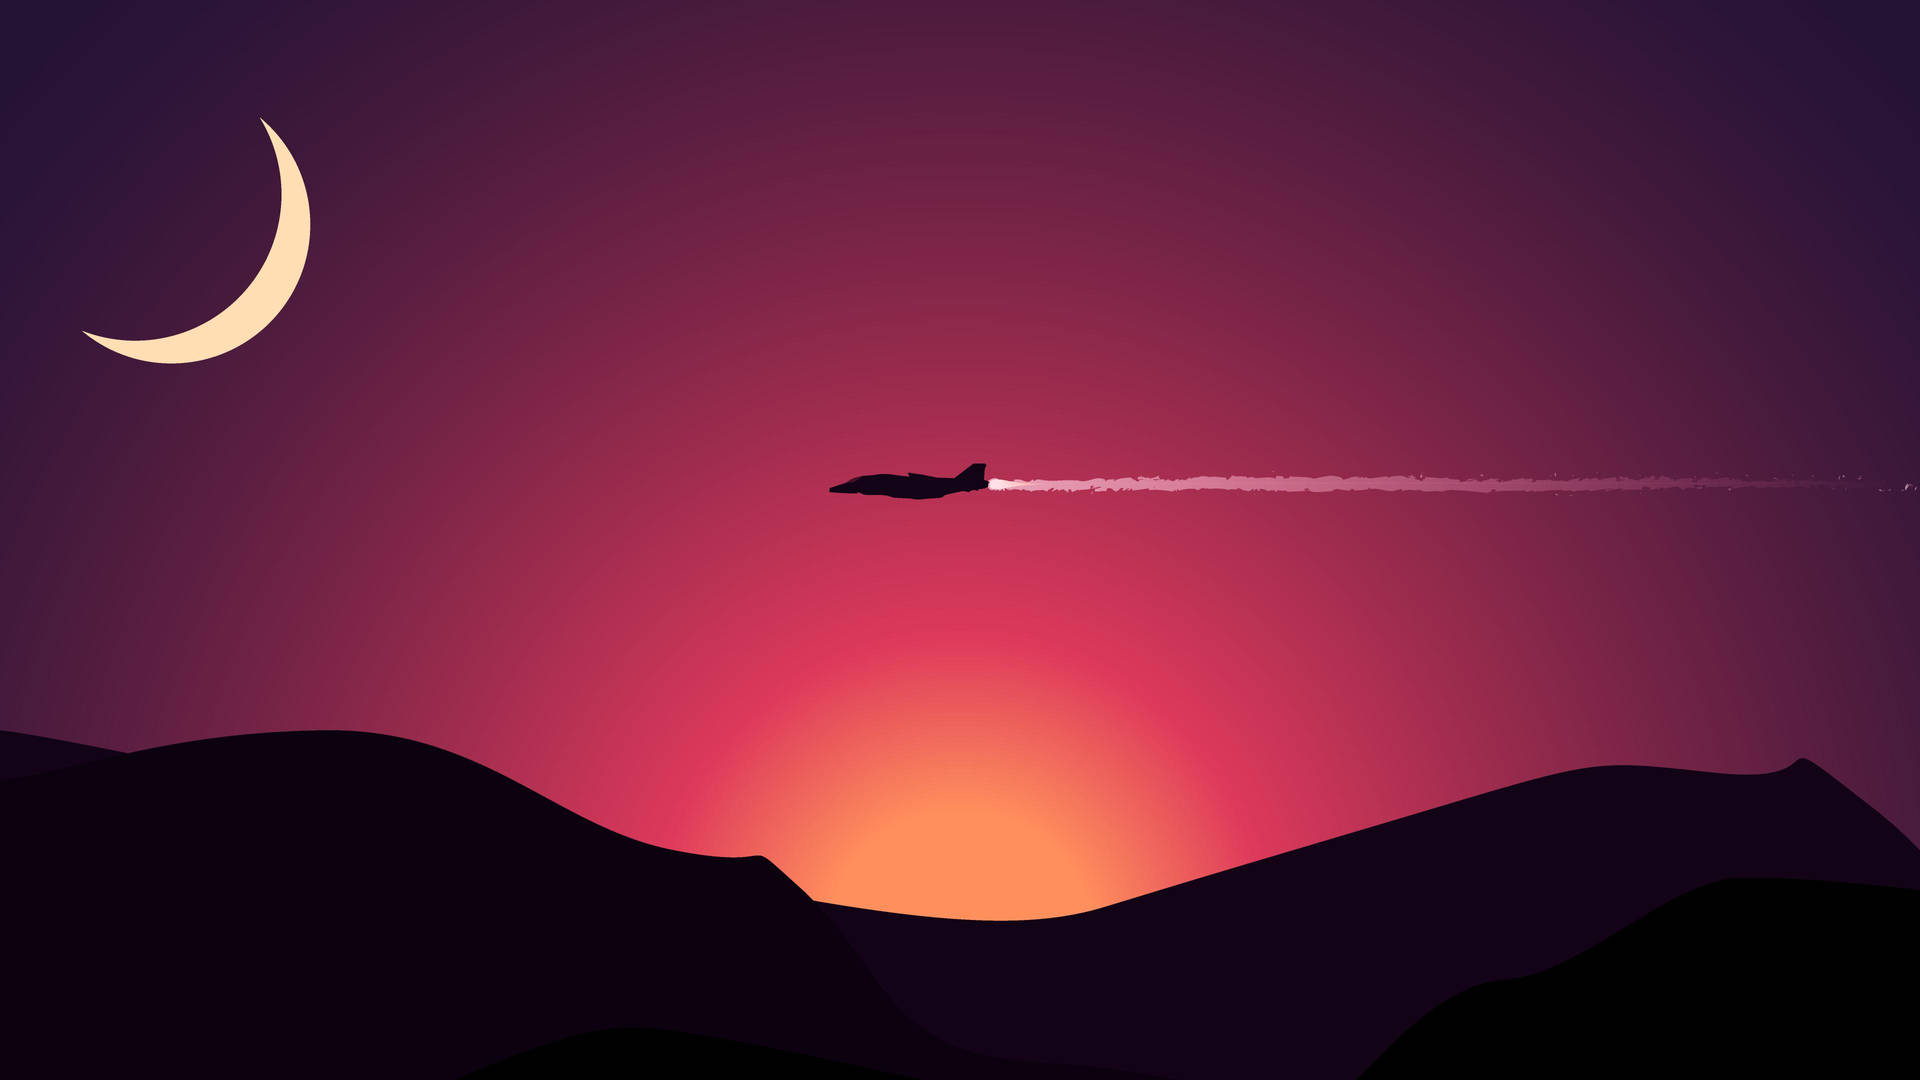 Enjoy The Beauty Of A Plane's Silhouette Against A Peaceful Sunset.